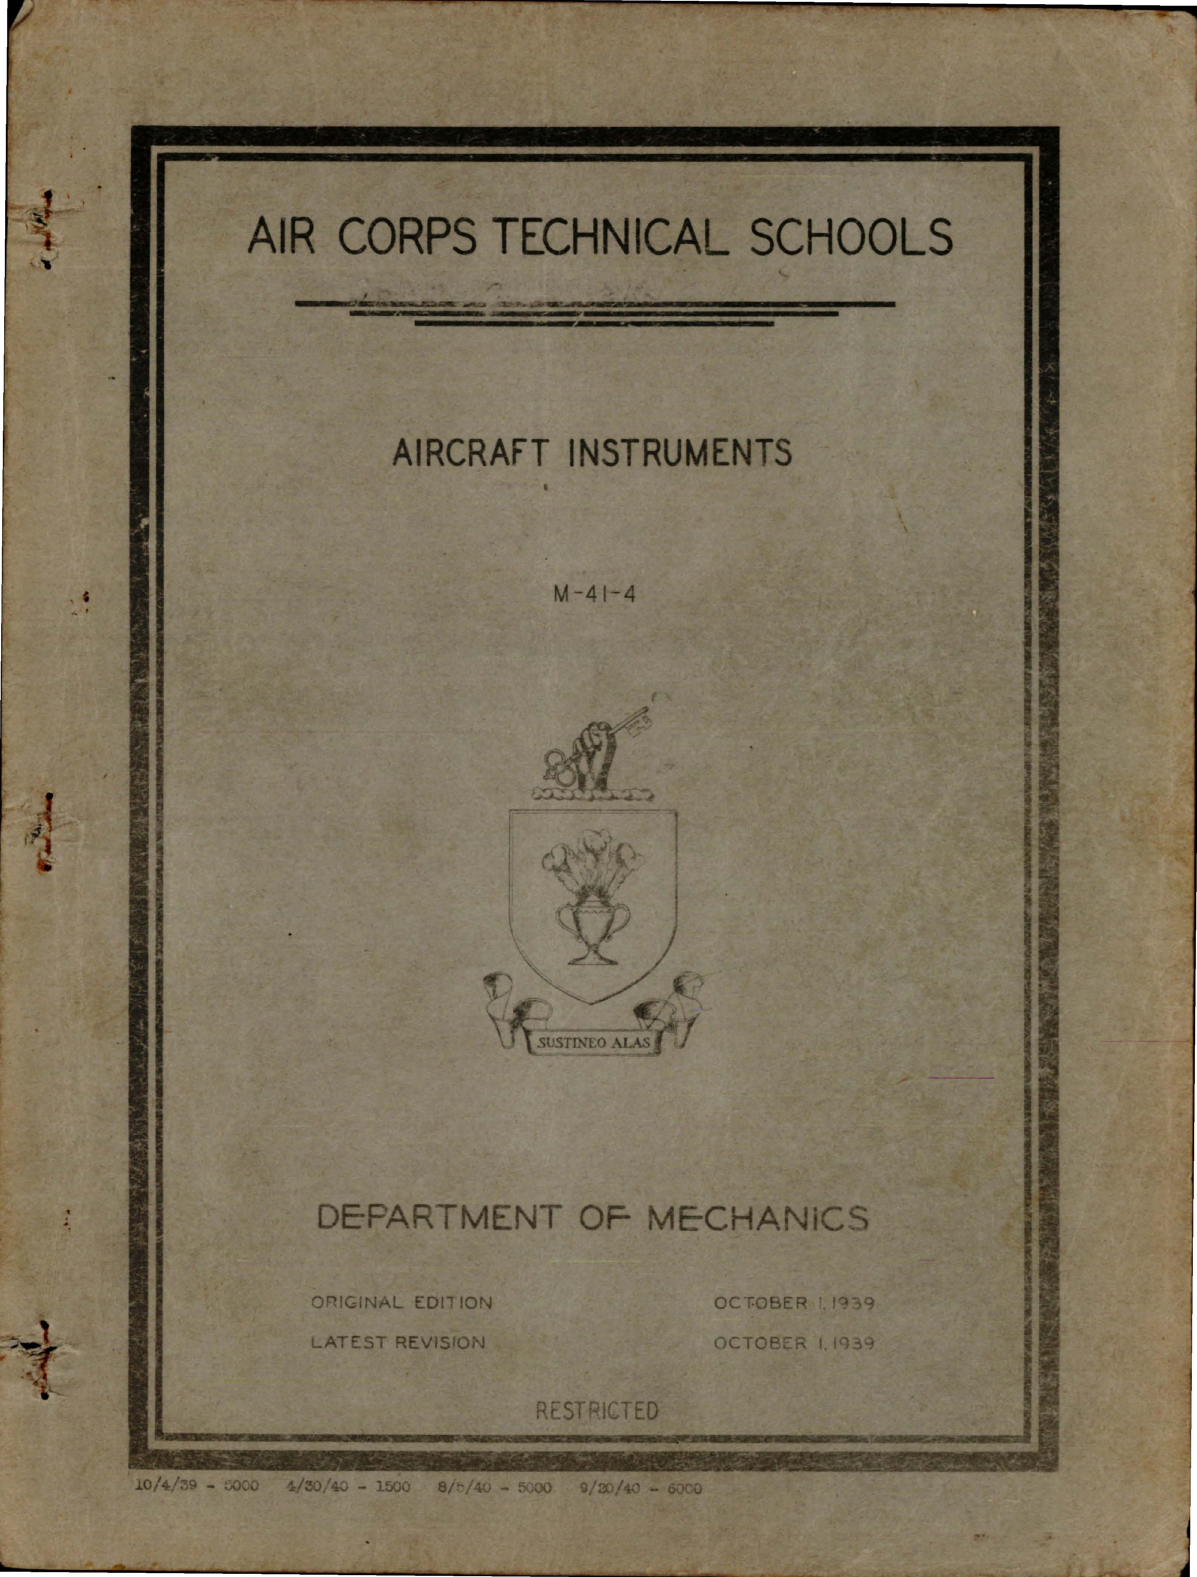 Sample page 1 from AirCorps Library document: Air Corps Technical Schools - Aircraft Instruments